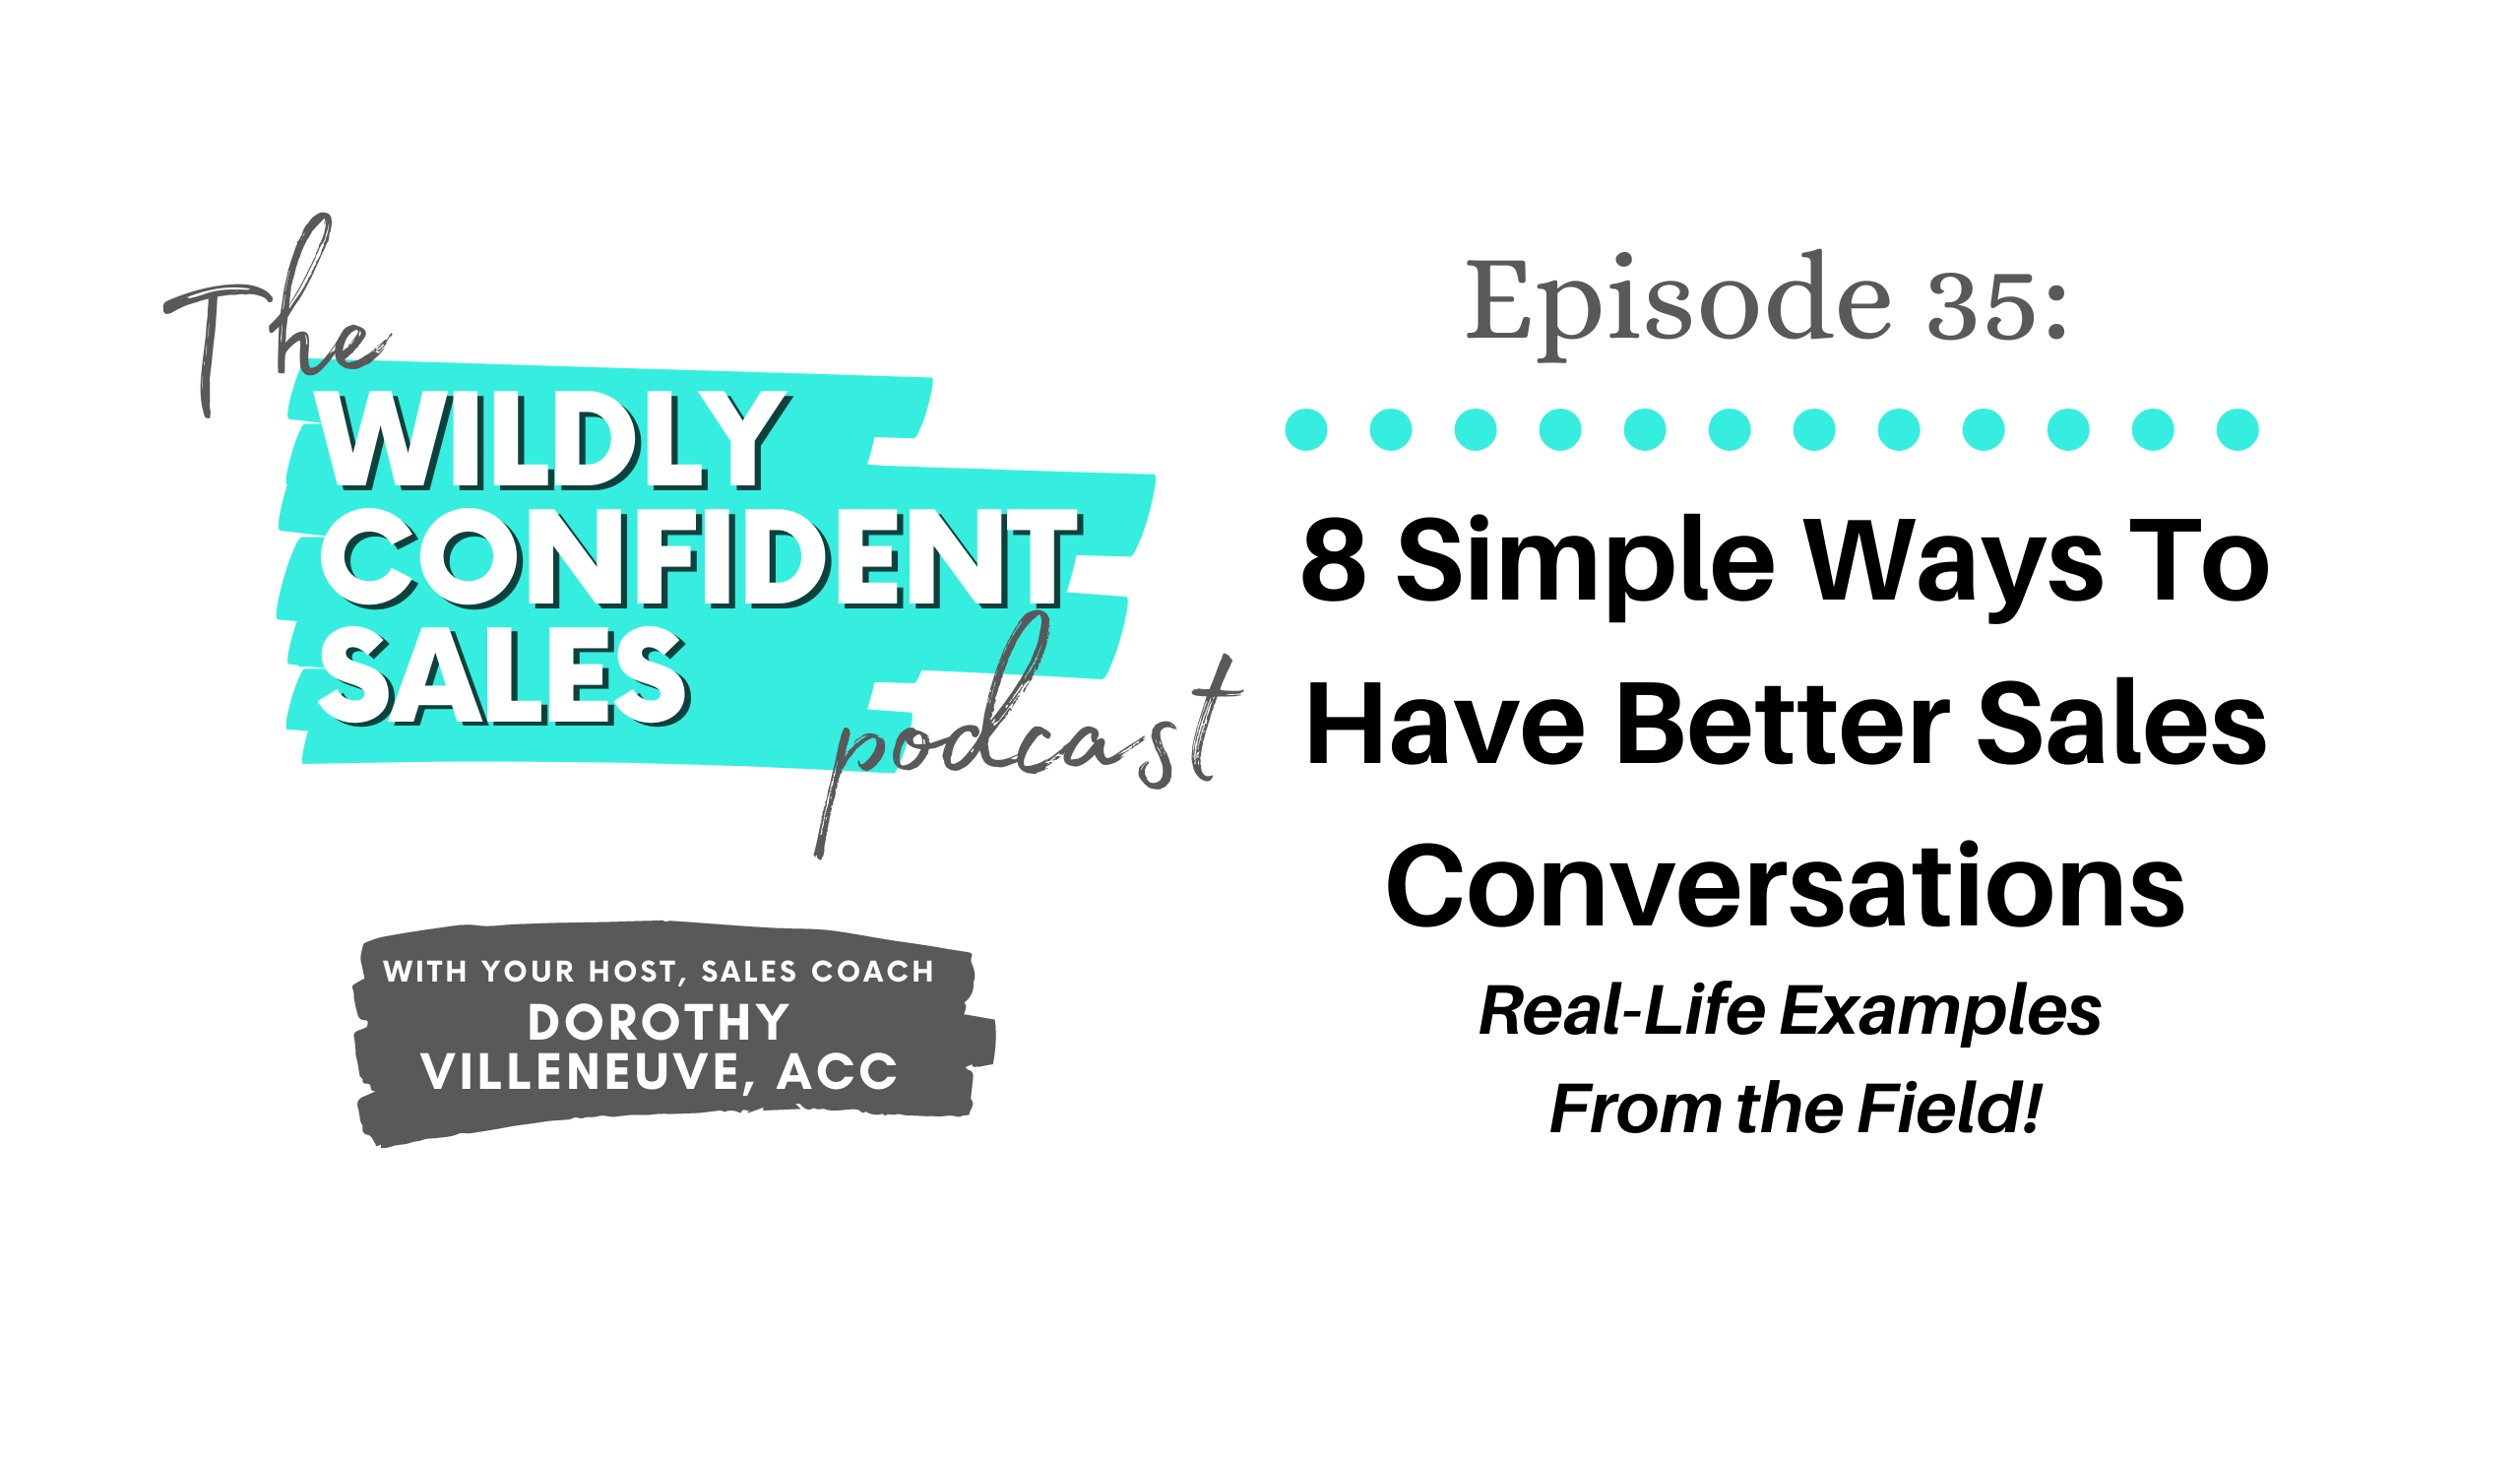 8 Simple Ways To Have Better Sales Conversations - Real-Life Examples From the Field - Wildly Confident Sales with Dorothy Villeneuve